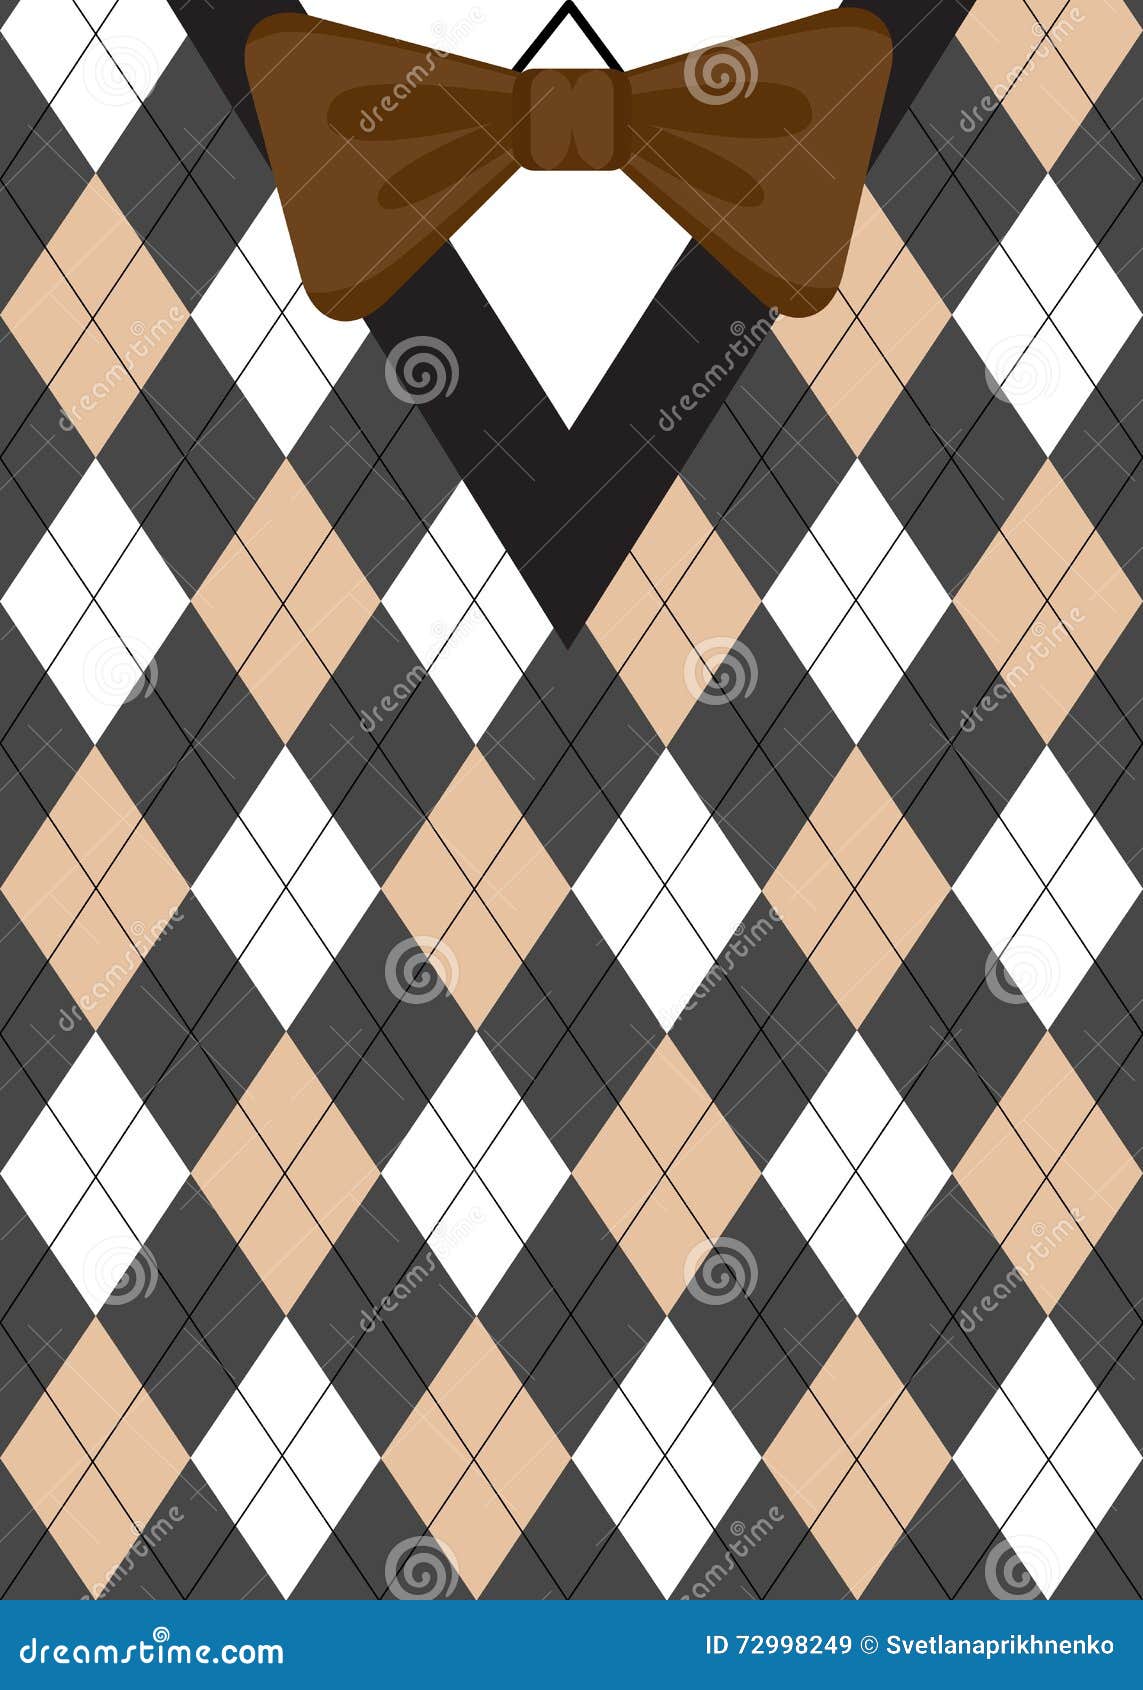 https://thumbs.dreamstime.com/z/preppy-argyle-background-sweater-brown-bow-tie-style-72998249.jpg